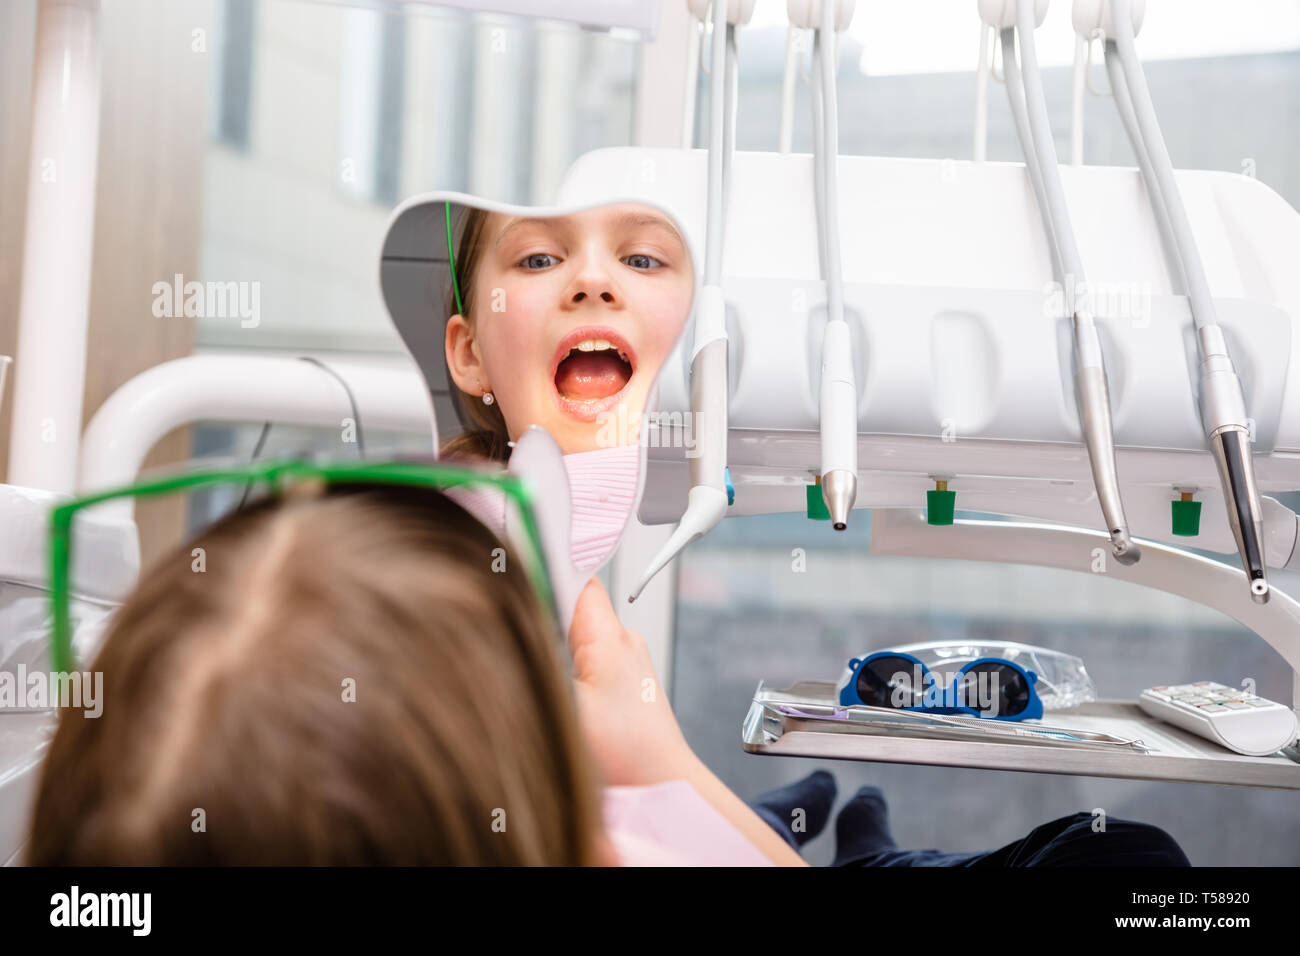 Preteen girl sitting in a dental chair inspecting repaired teeth looking at tooth-shaped mirror in pediatric dental clinic Stock Photo